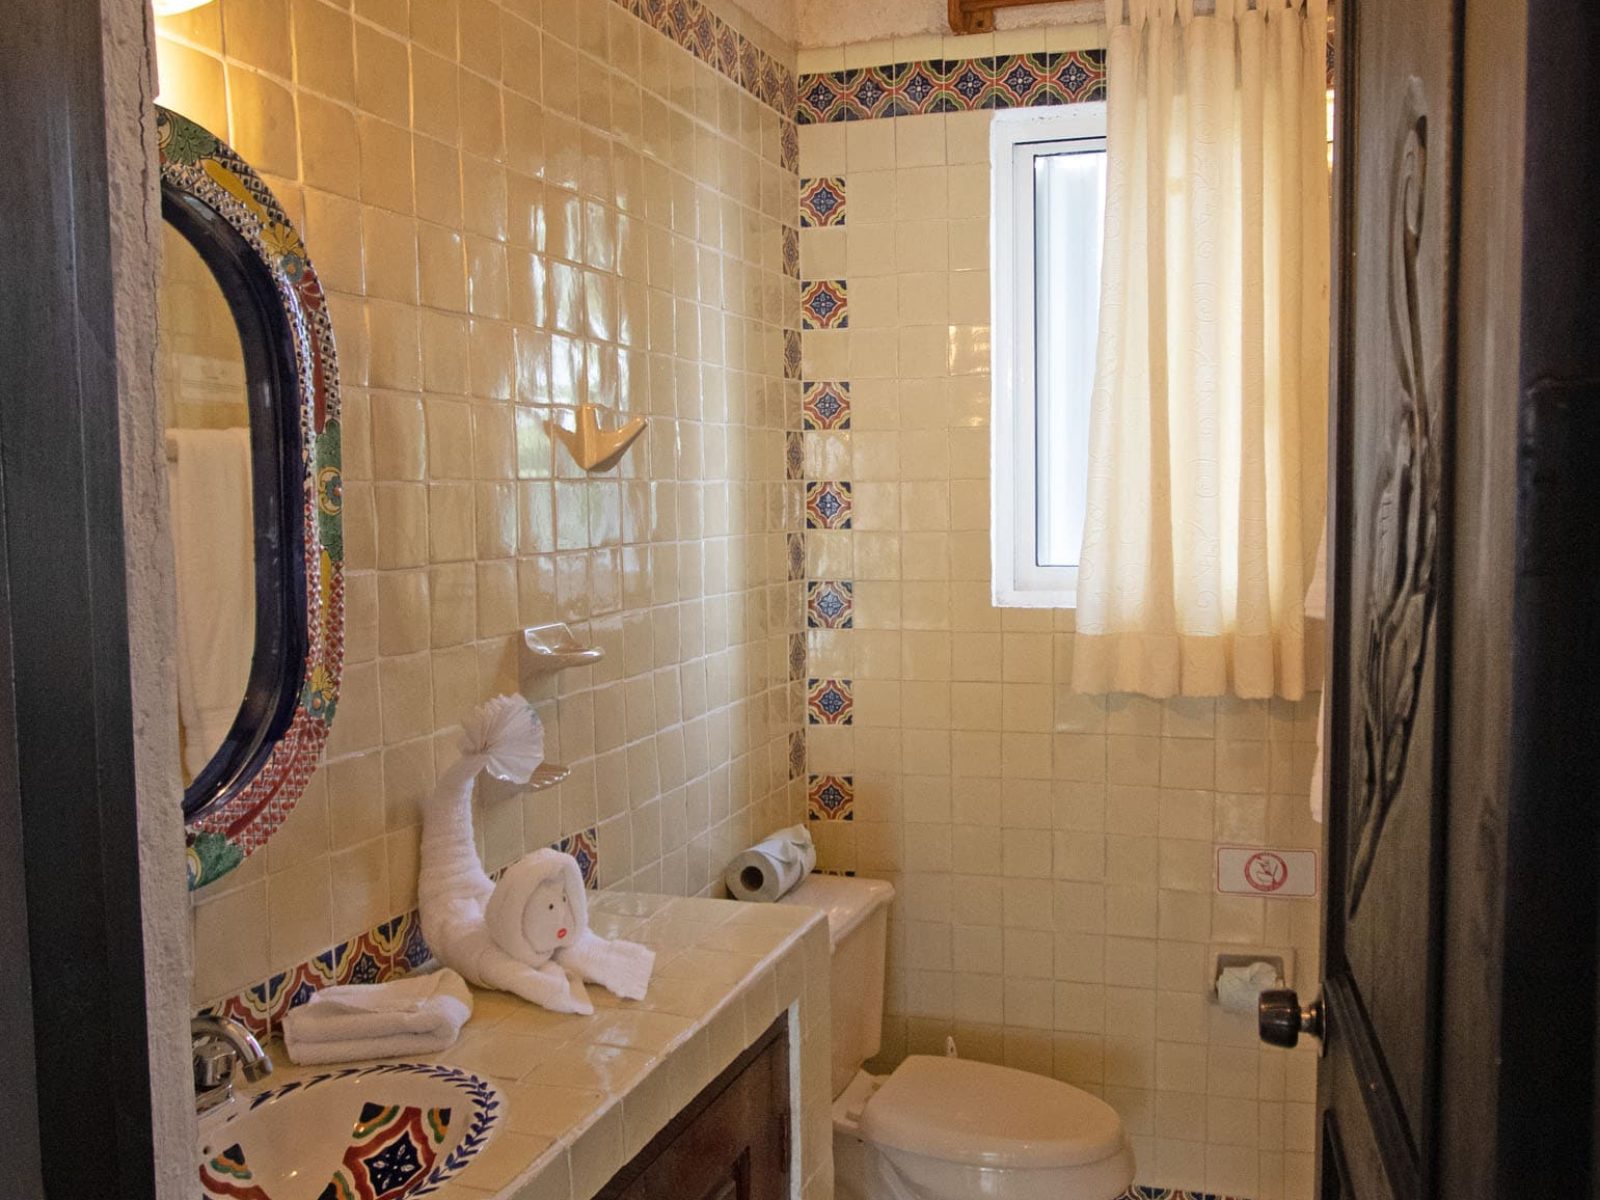 Tranquility, La Sirena #8, The On-Suite Master Bathroom has a roomy shower and traditional talavera tile